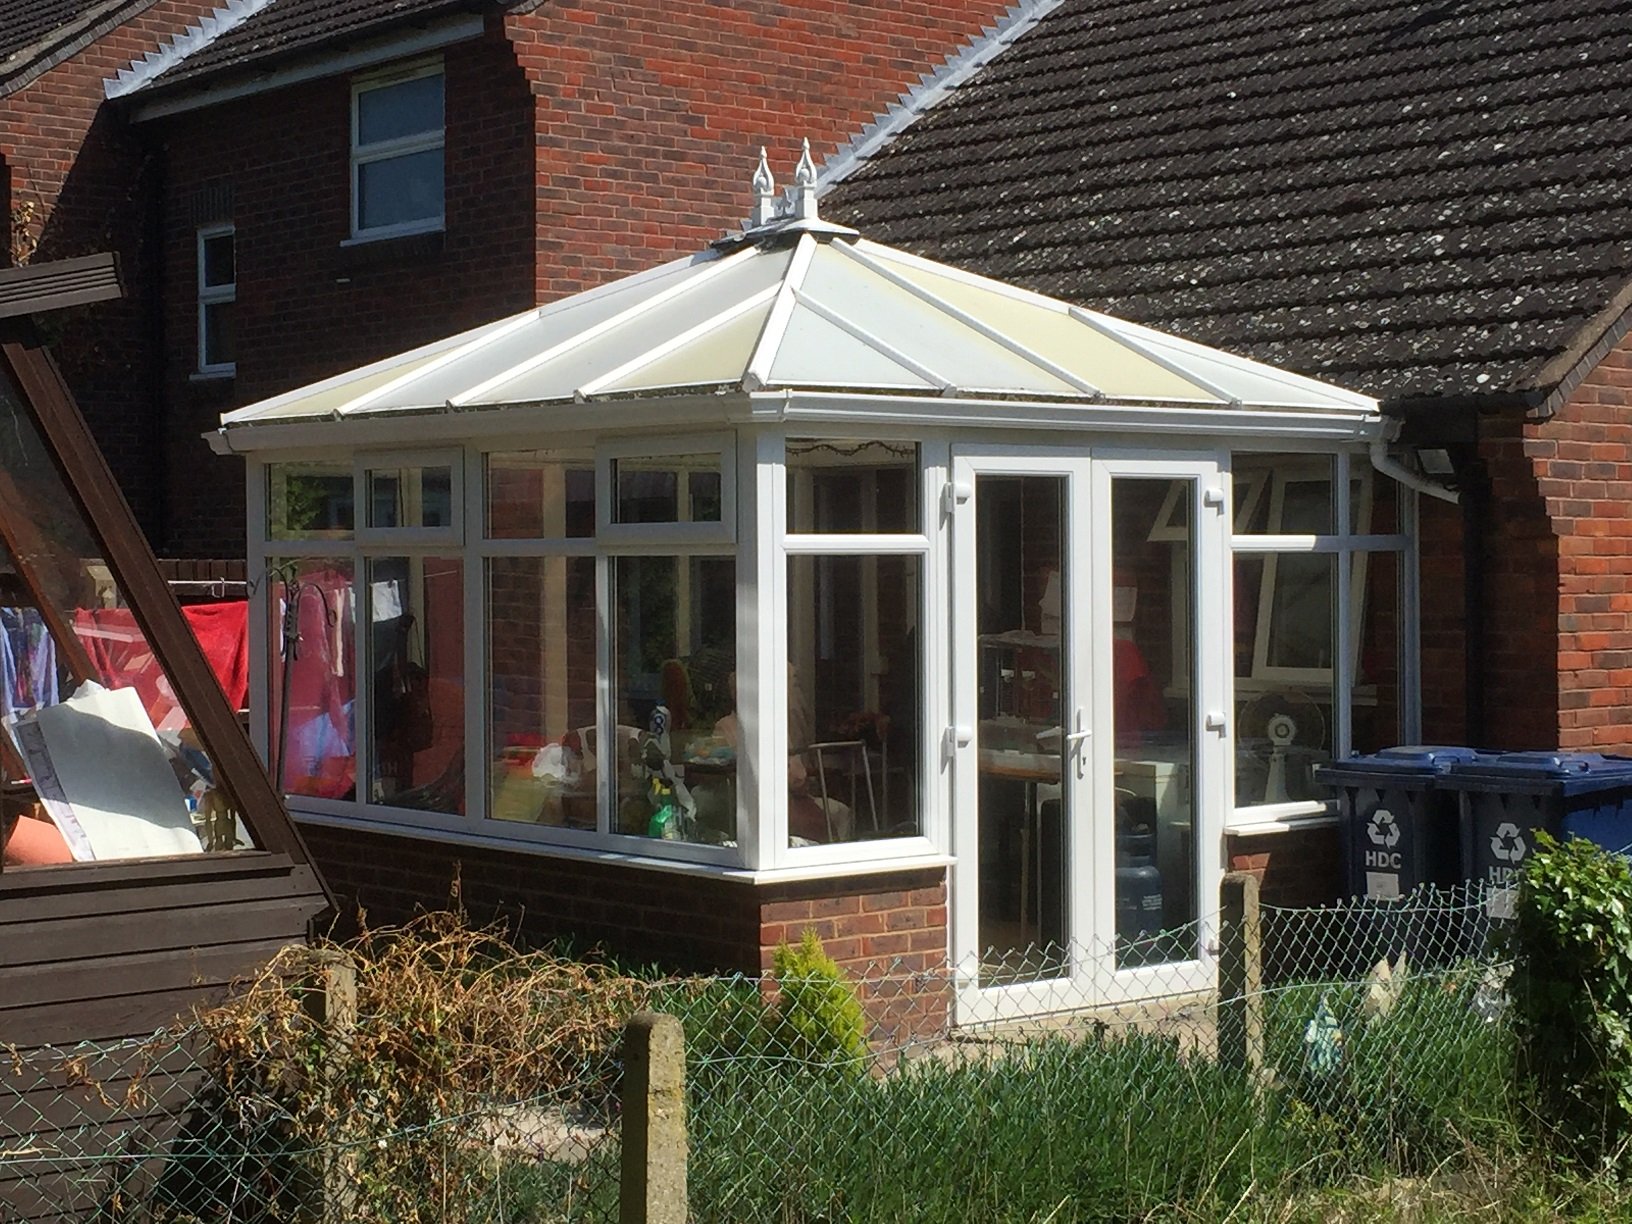 Conservatory before a Tiled Conservatory Roof transformation